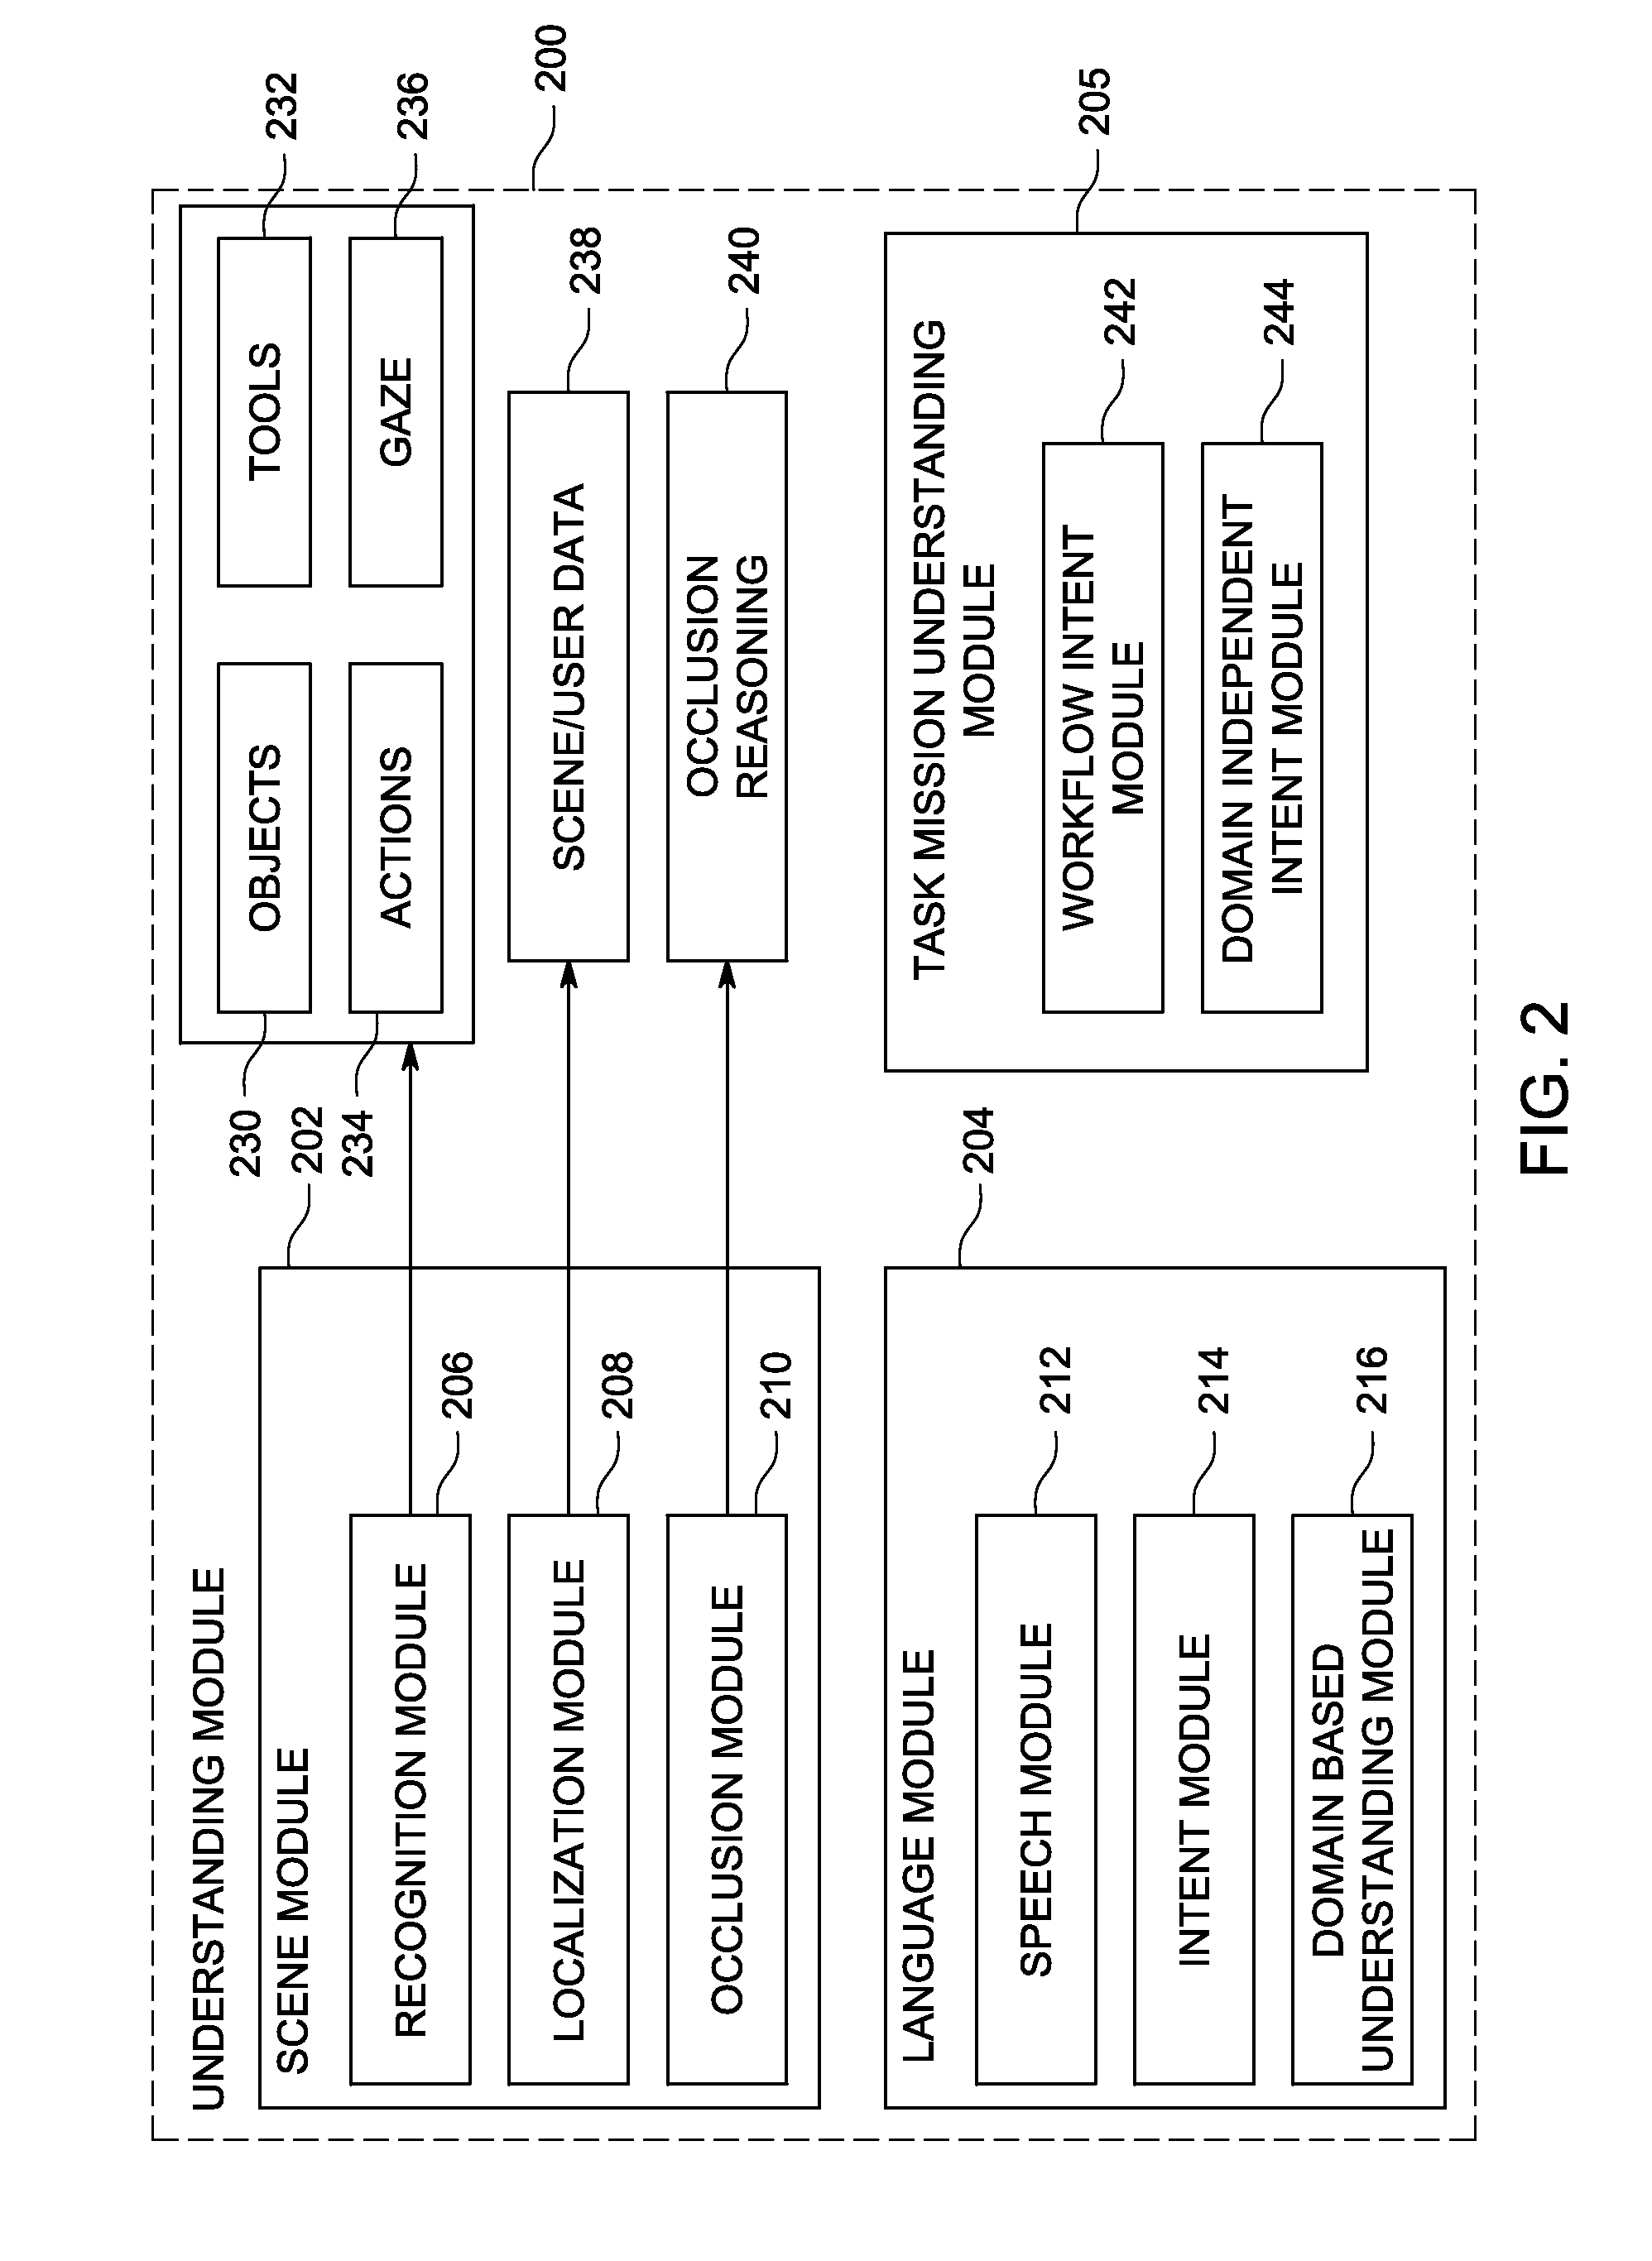 Method and apparatus for mentoring via an augmented reality assistant